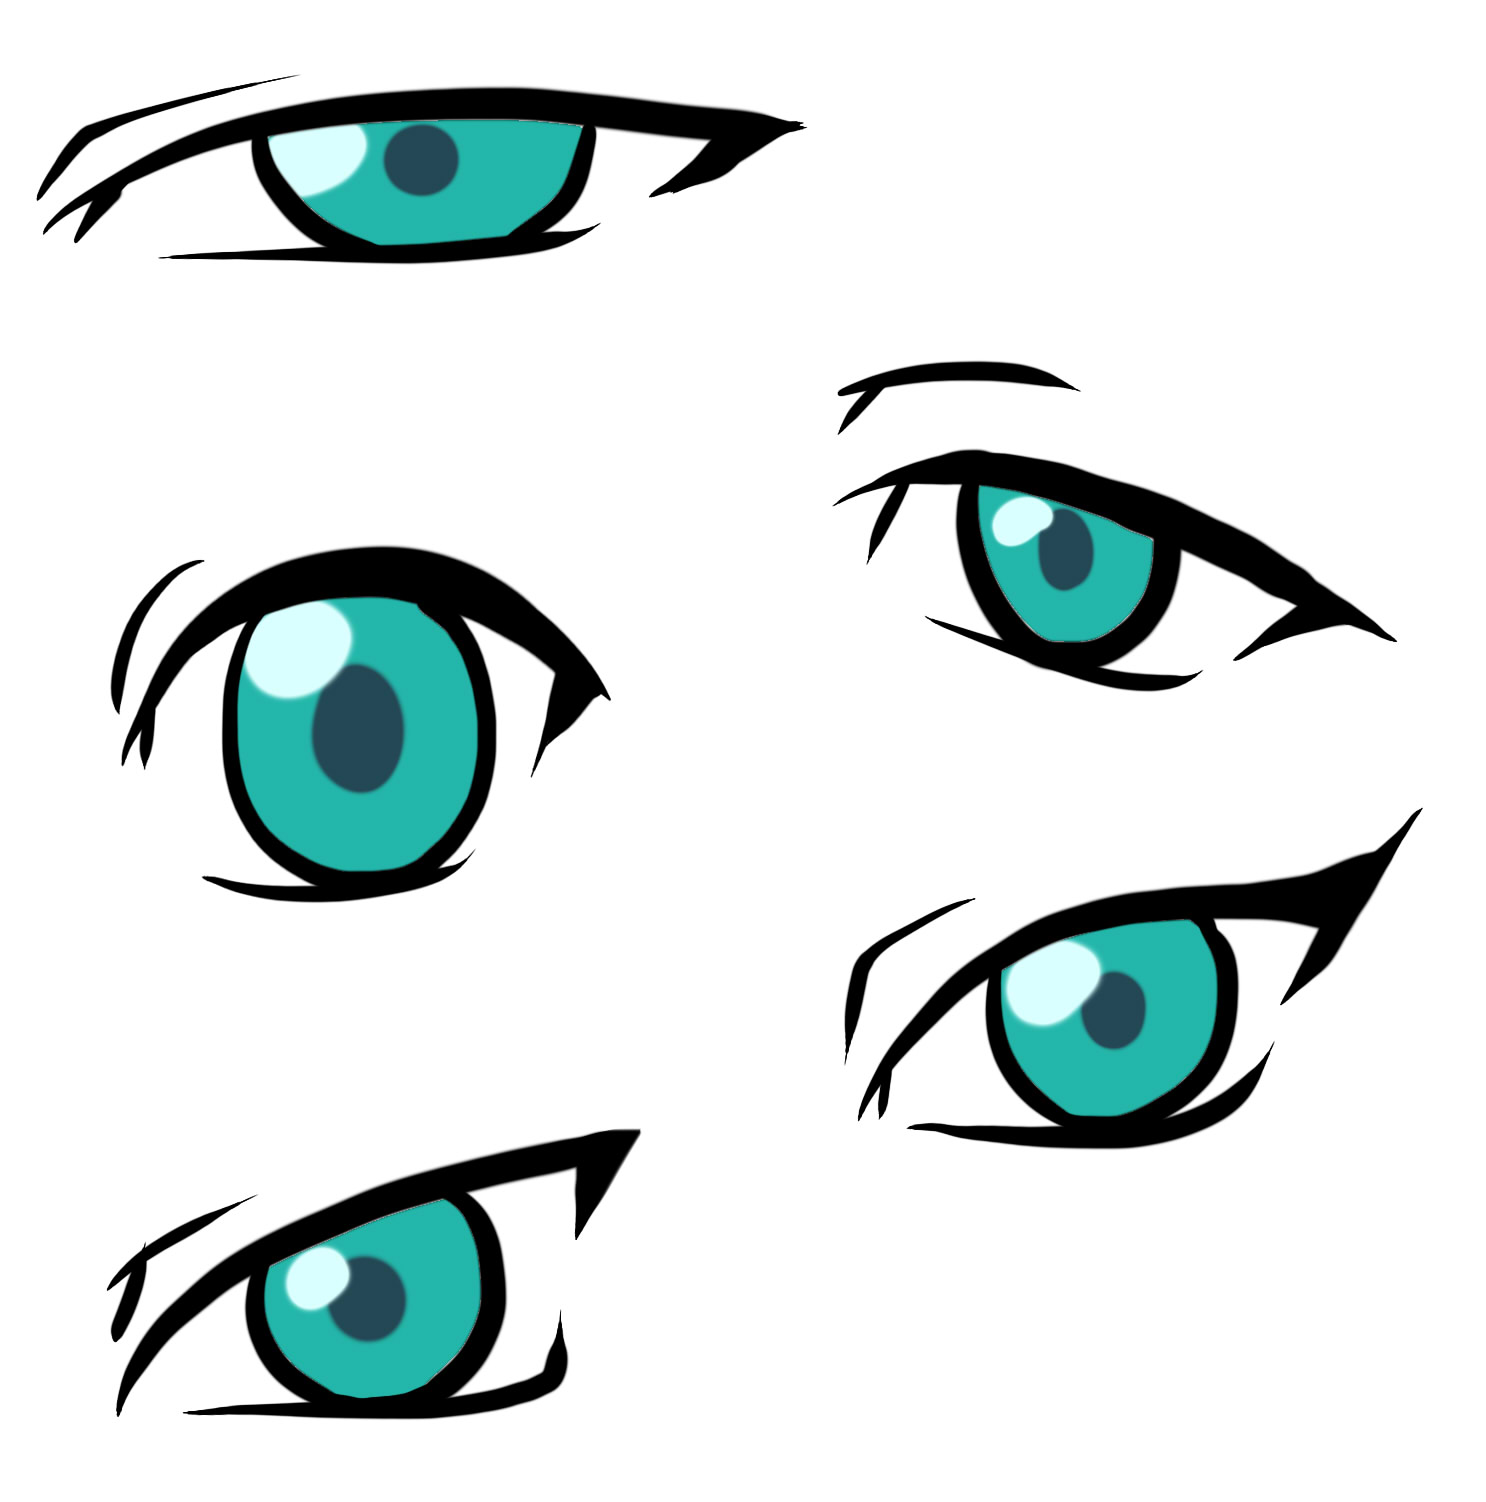 Scared Anime Eyes Male Hd Images 3 HD Wallpapers | Planezen.com ...